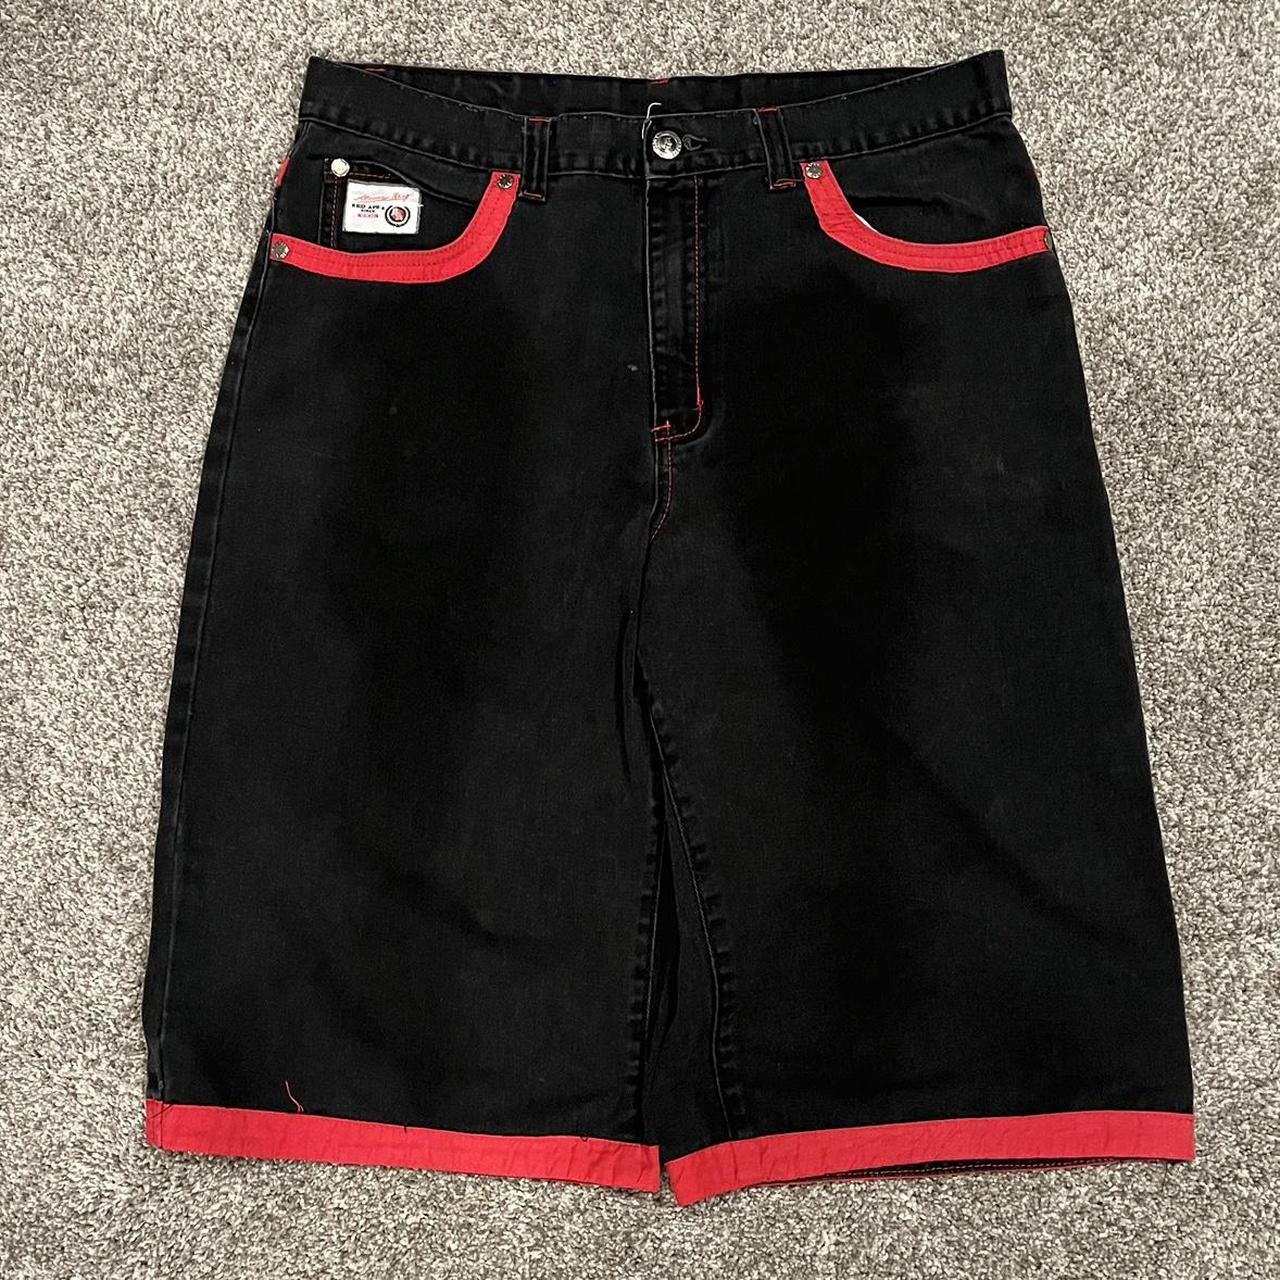 Y2K Baggy Red Ape Jorts Message for any questions... - Depop